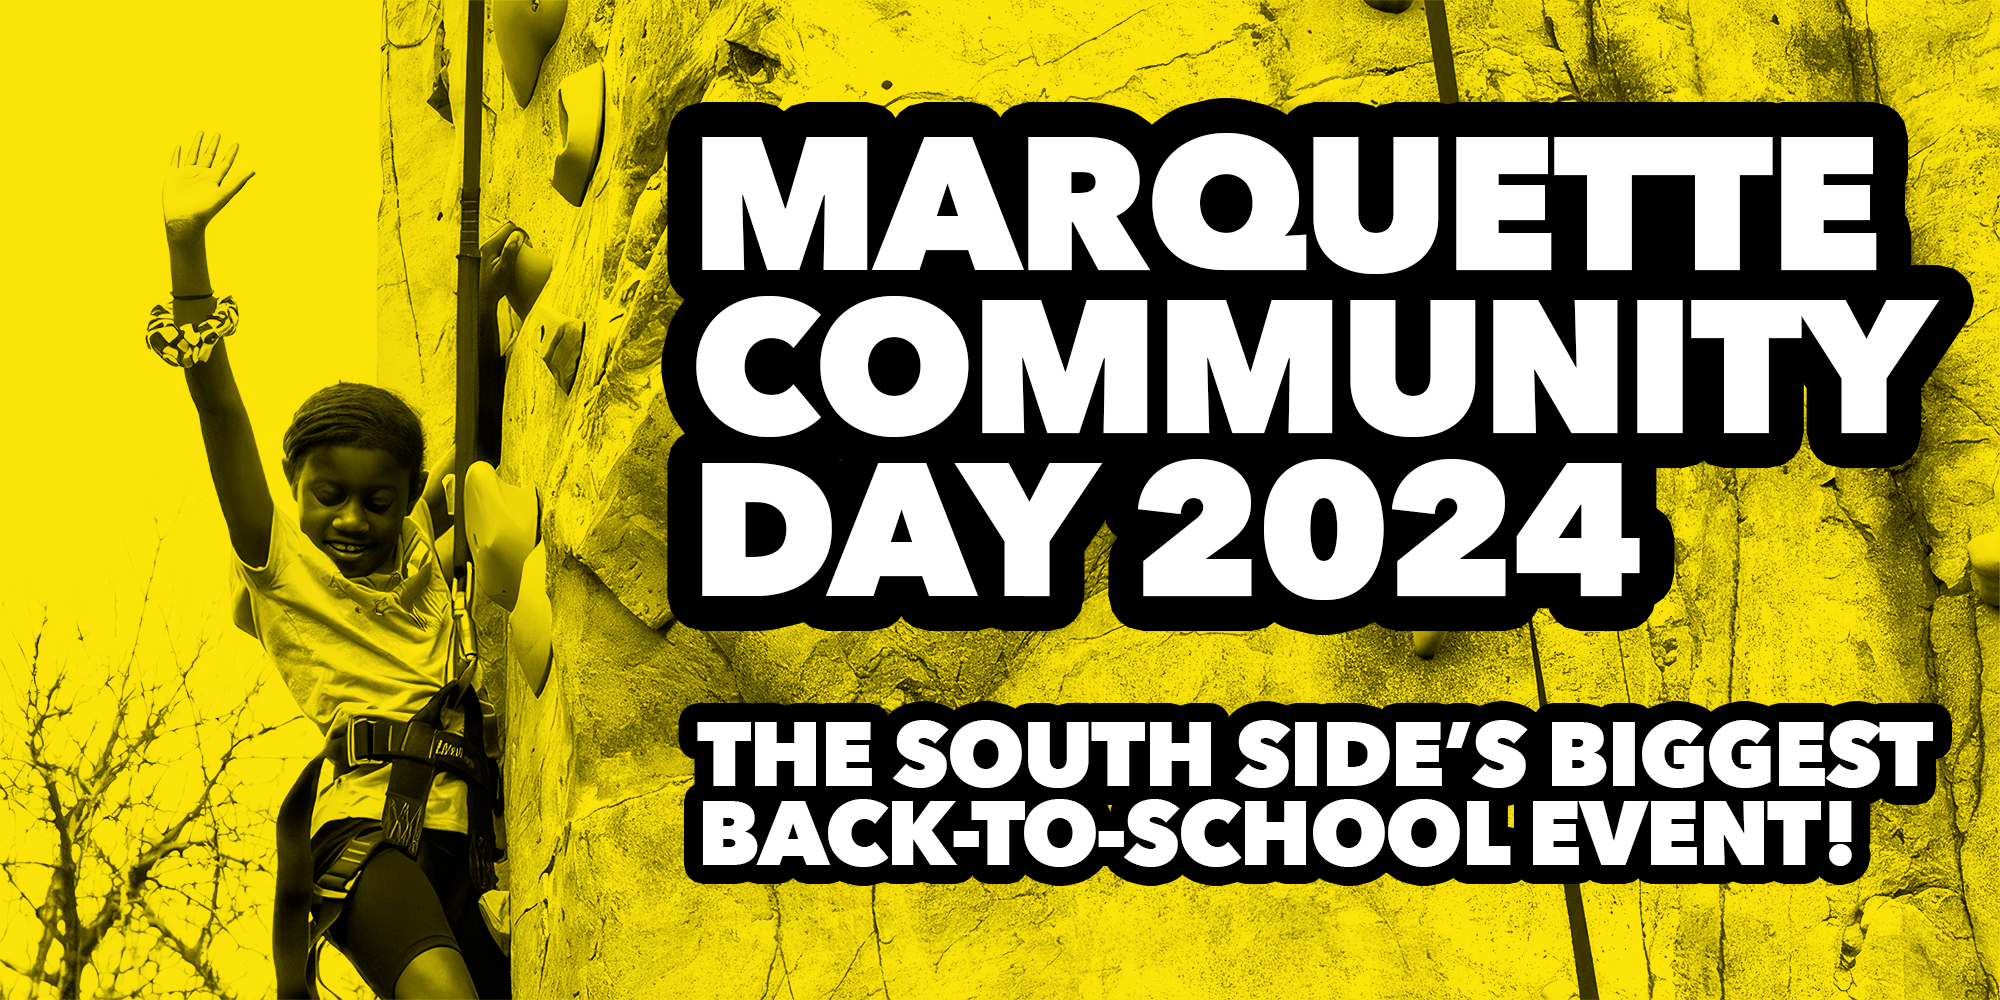 Marquette Community Day 2024: The South Side's Biggest Back-to-School Event!